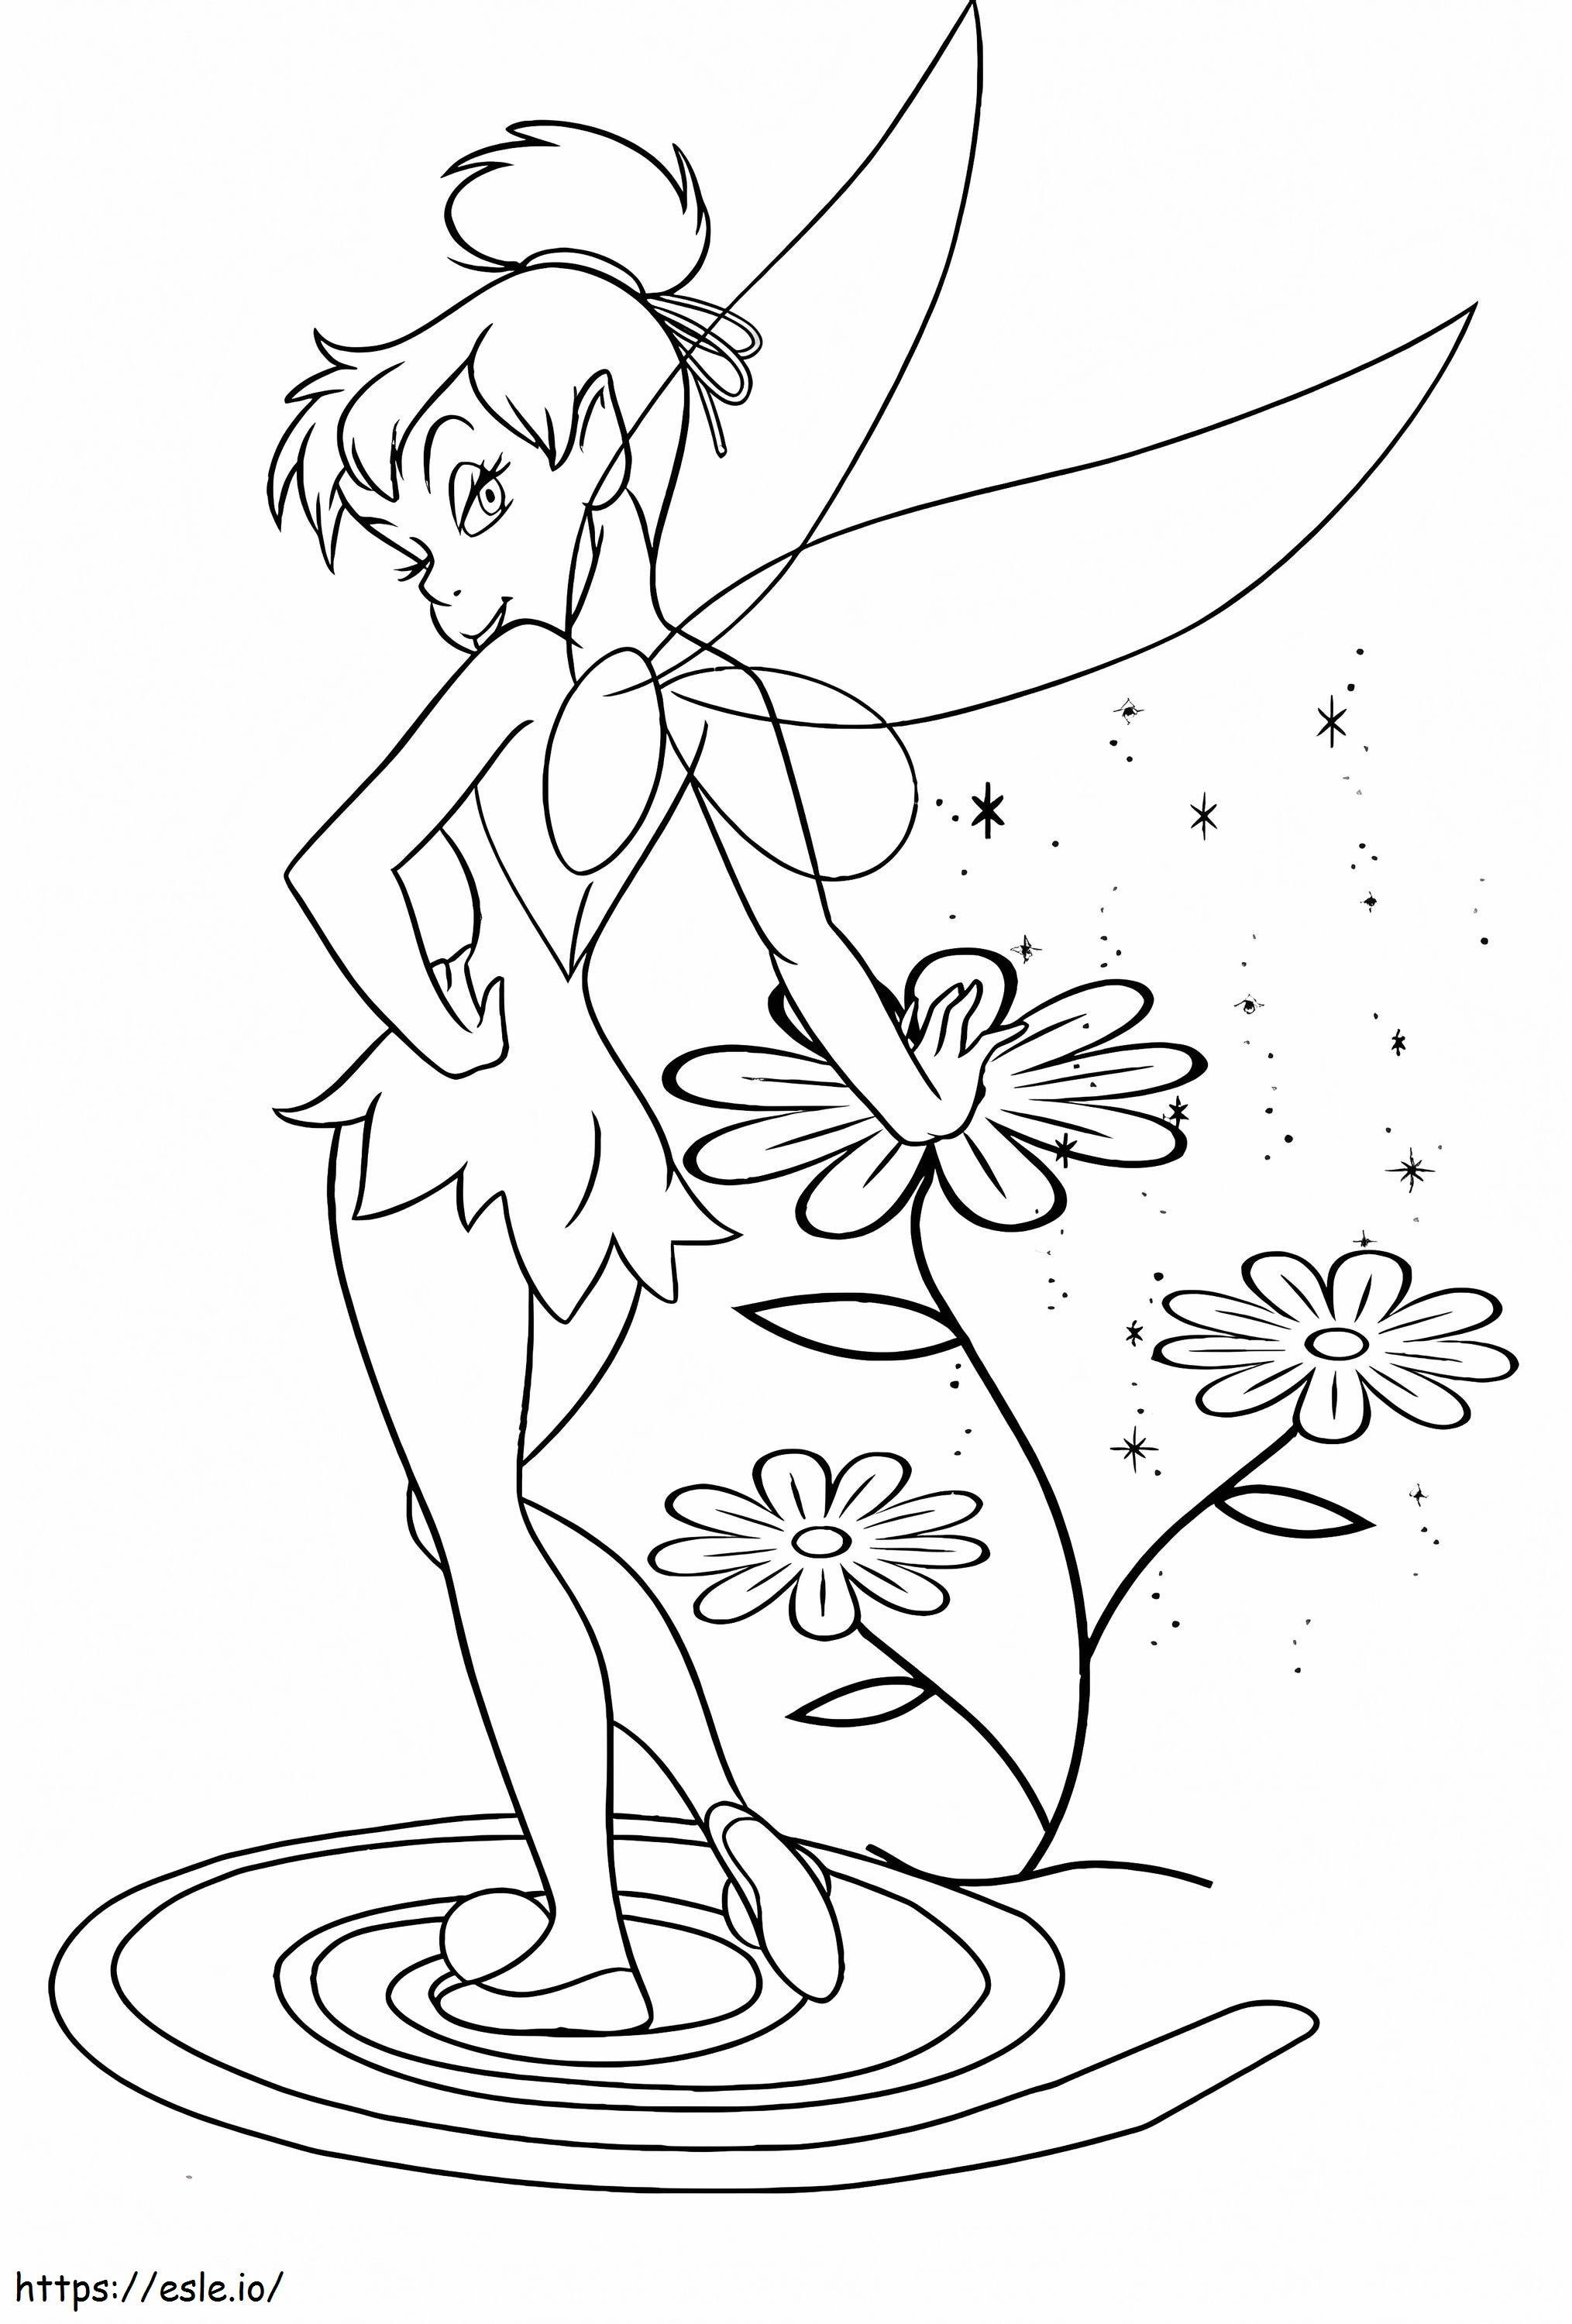 Tinkerbell Con Flores coloring page